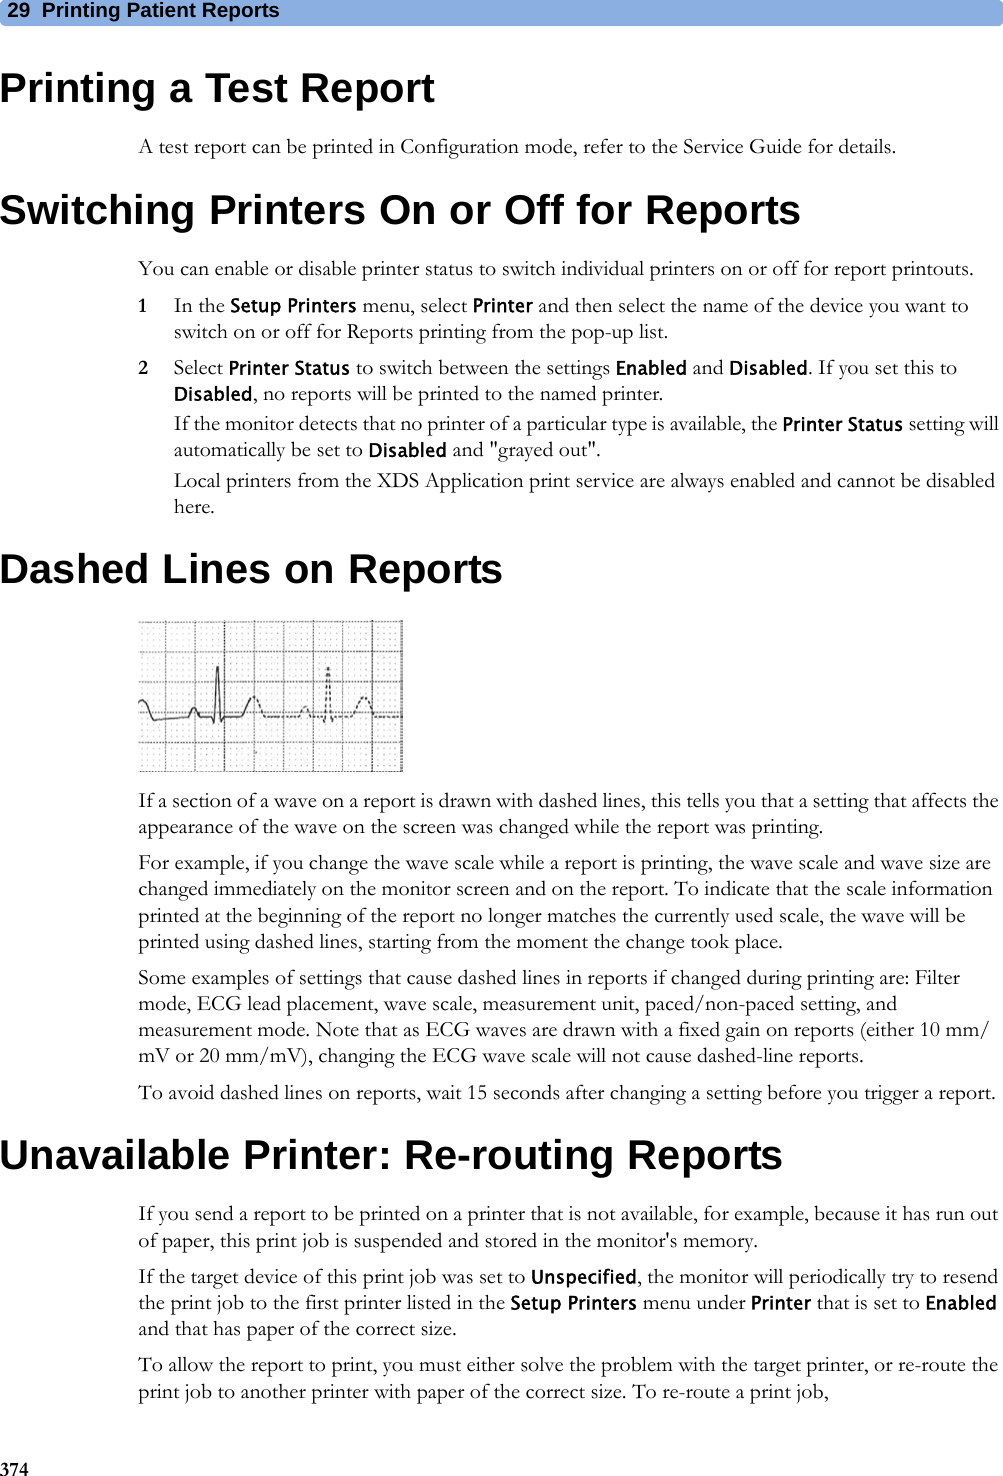 29 Printing Patient Reports374Printing a Test ReportA test report can be printed in Configuration mode, refer to the Service Guide for details.Switching Printers On or Off for ReportsYou can enable or disable printer status to switch individual printers on or off for report printouts.1In the Setup Printers menu, select Printer and then select the name of the device you want to switch on or off for Reports printing from the pop-up list.2Select Printer Status to switch between the settings Enabled and Disabled. If you set this to Disabled, no reports will be printed to the named printer.If the monitor detects that no printer of a particular type is available, the Printer Status setting will automatically be set to Disabled and &quot;grayed out&quot;.Local printers from the XDS Application print service are always enabled and cannot be disabled here.Dashed Lines on ReportsIf a section of a wave on a report is drawn with dashed lines, this tells you that a setting that affects the appearance of the wave on the screen was changed while the report was printing.For example, if you change the wave scale while a report is printing, the wave scale and wave size are changed immediately on the monitor screen and on the report. To indicate that the scale information printed at the beginning of the report no longer matches the currently used scale, the wave will be printed using dashed lines, starting from the moment the change took place.Some examples of settings that cause dashed lines in reports if changed during printing are: Filter mode, ECG lead placement, wave scale, measurement unit, paced/non-paced setting, and measurement mode. Note that as ECG waves are drawn with a fixed gain on reports (either 10 mm/mV or 20 mm/mV), changing the ECG wave scale will not cause dashed-line reports.To avoid dashed lines on reports, wait 15 seconds after changing a setting before you trigger a report.Unavailable Printer: Re-routing ReportsIf you send a report to be printed on a printer that is not available, for example, because it has run out of paper, this print job is suspended and stored in the monitor&apos;s memory.If the target device of this print job was set to Unspecified, the monitor will periodically try to resend the print job to the first printer listed in the Setup Printers menu under Printer that is set to Enabled and that has paper of the correct size.To allow the report to print, you must either solve the problem with the target printer, or re-route the print job to another printer with paper of the correct size. To re-route a print job,